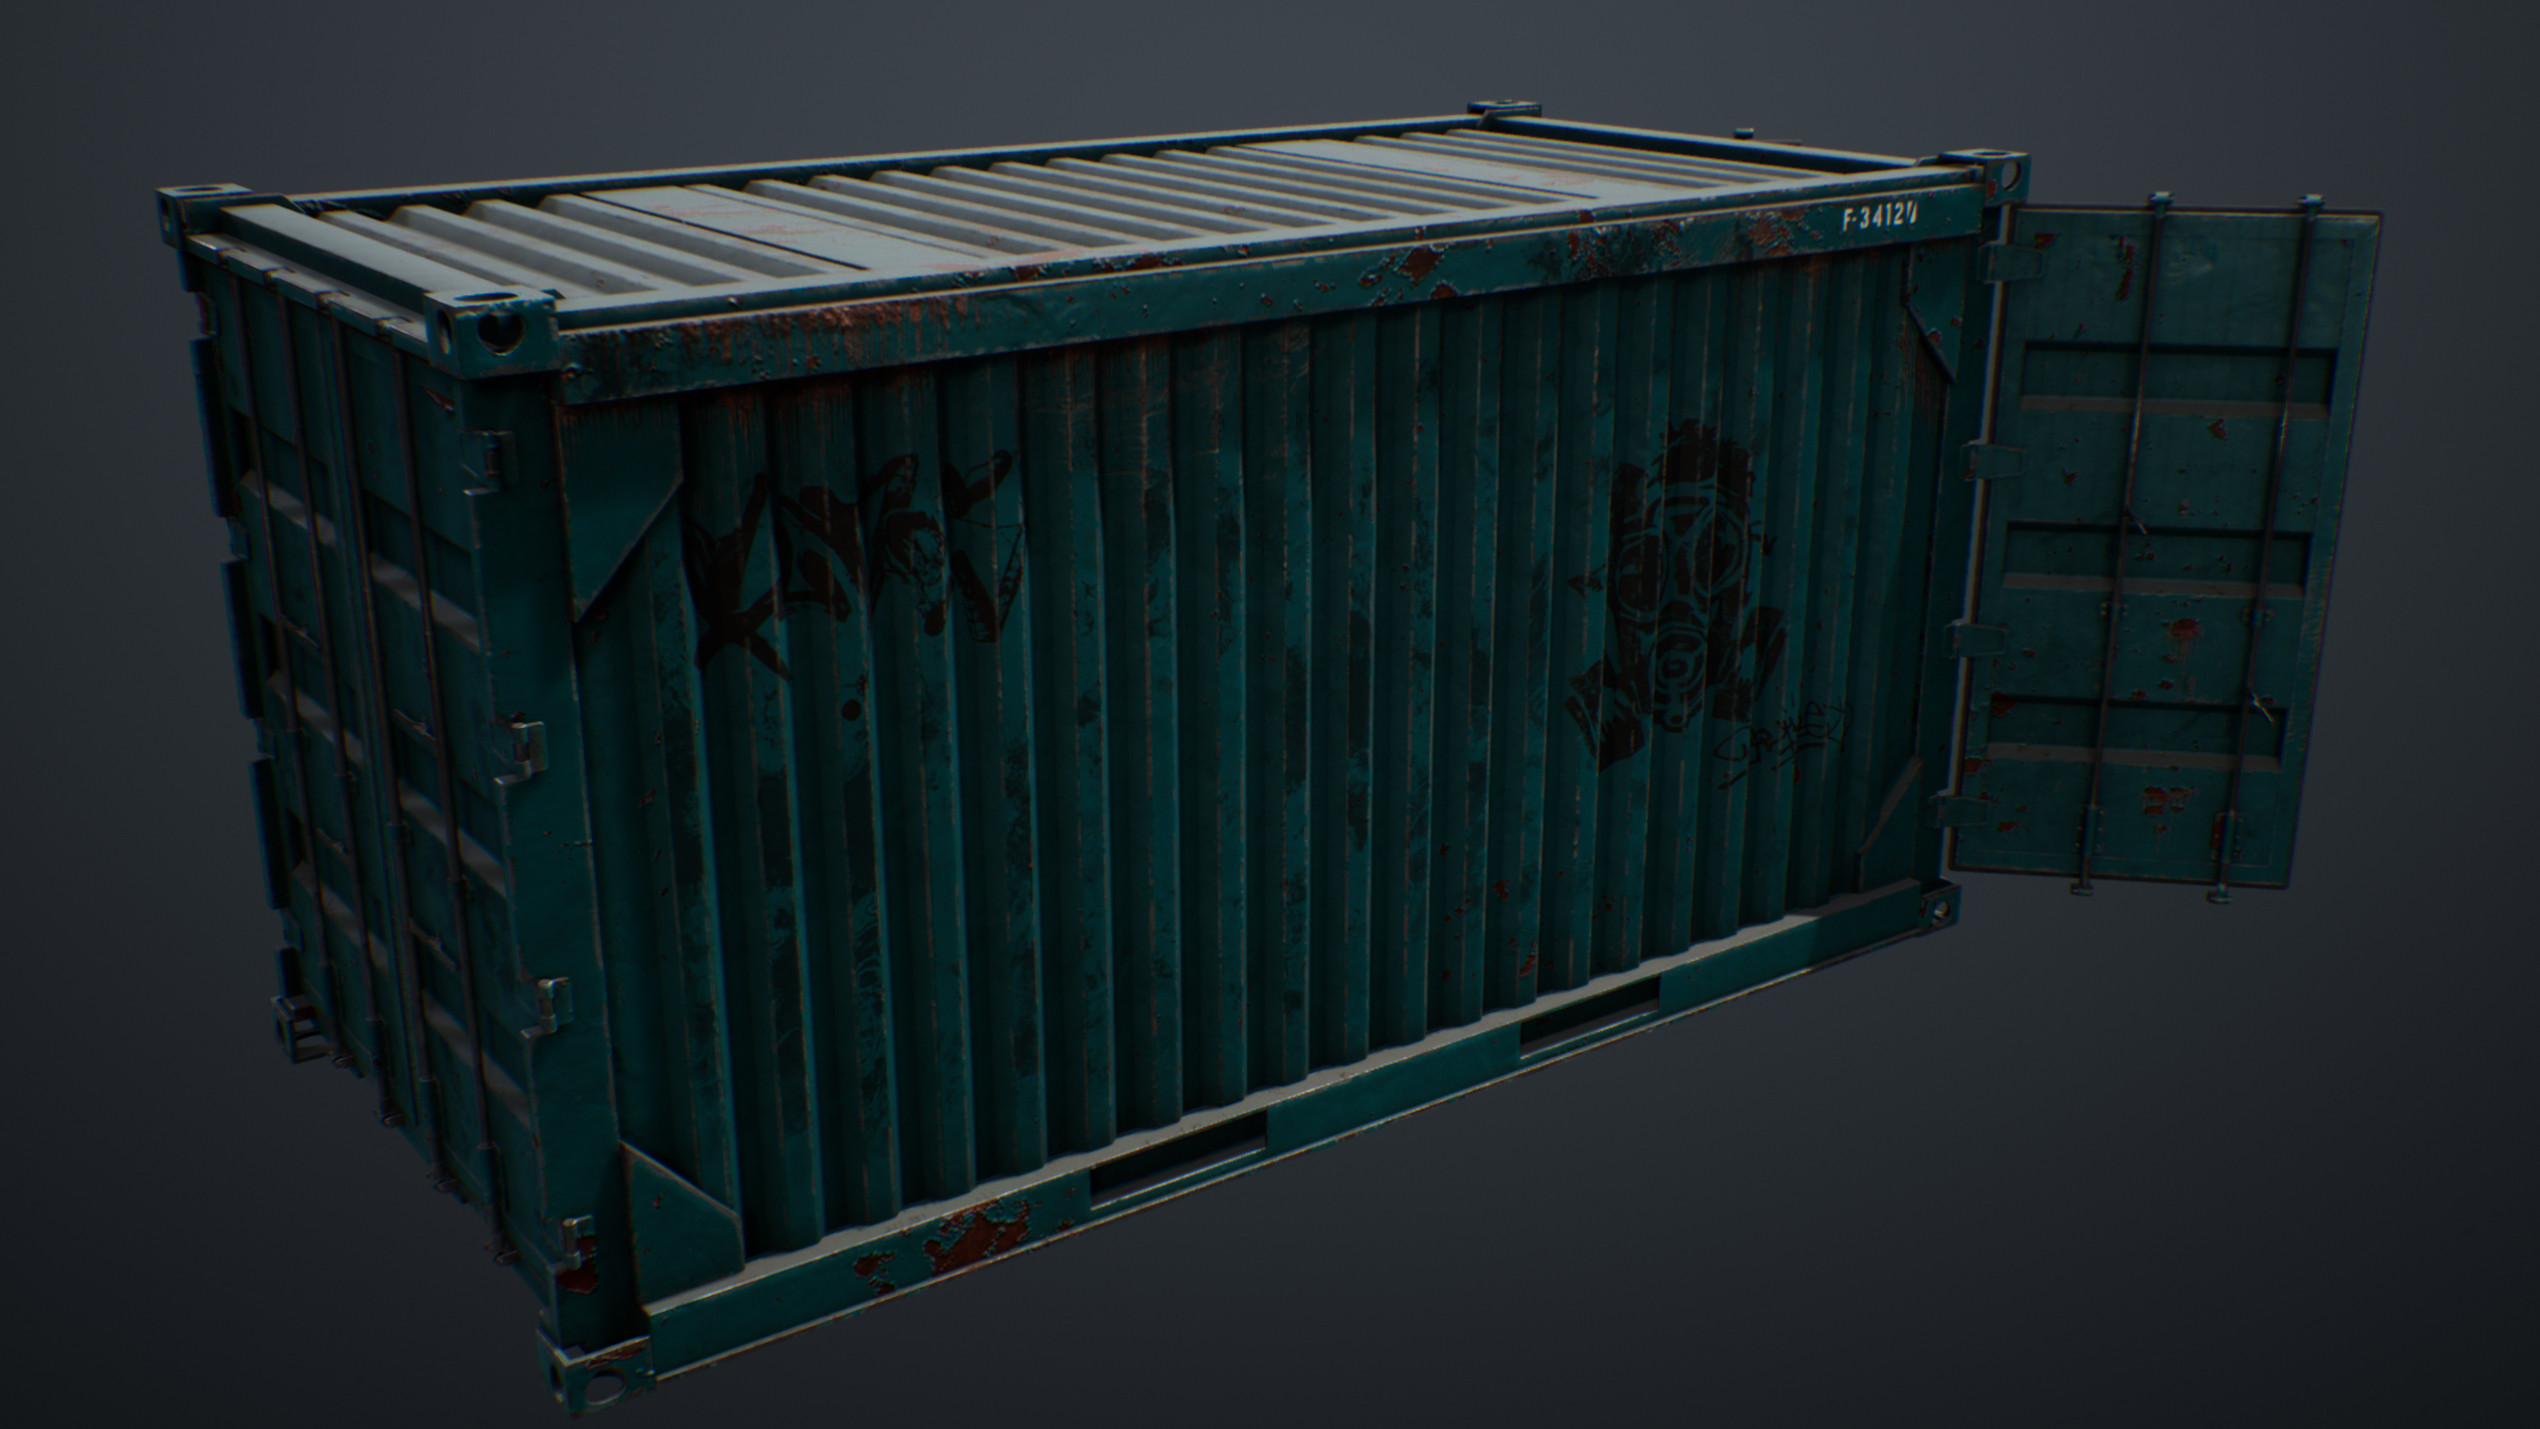 UE4 screenshot of the container back view.